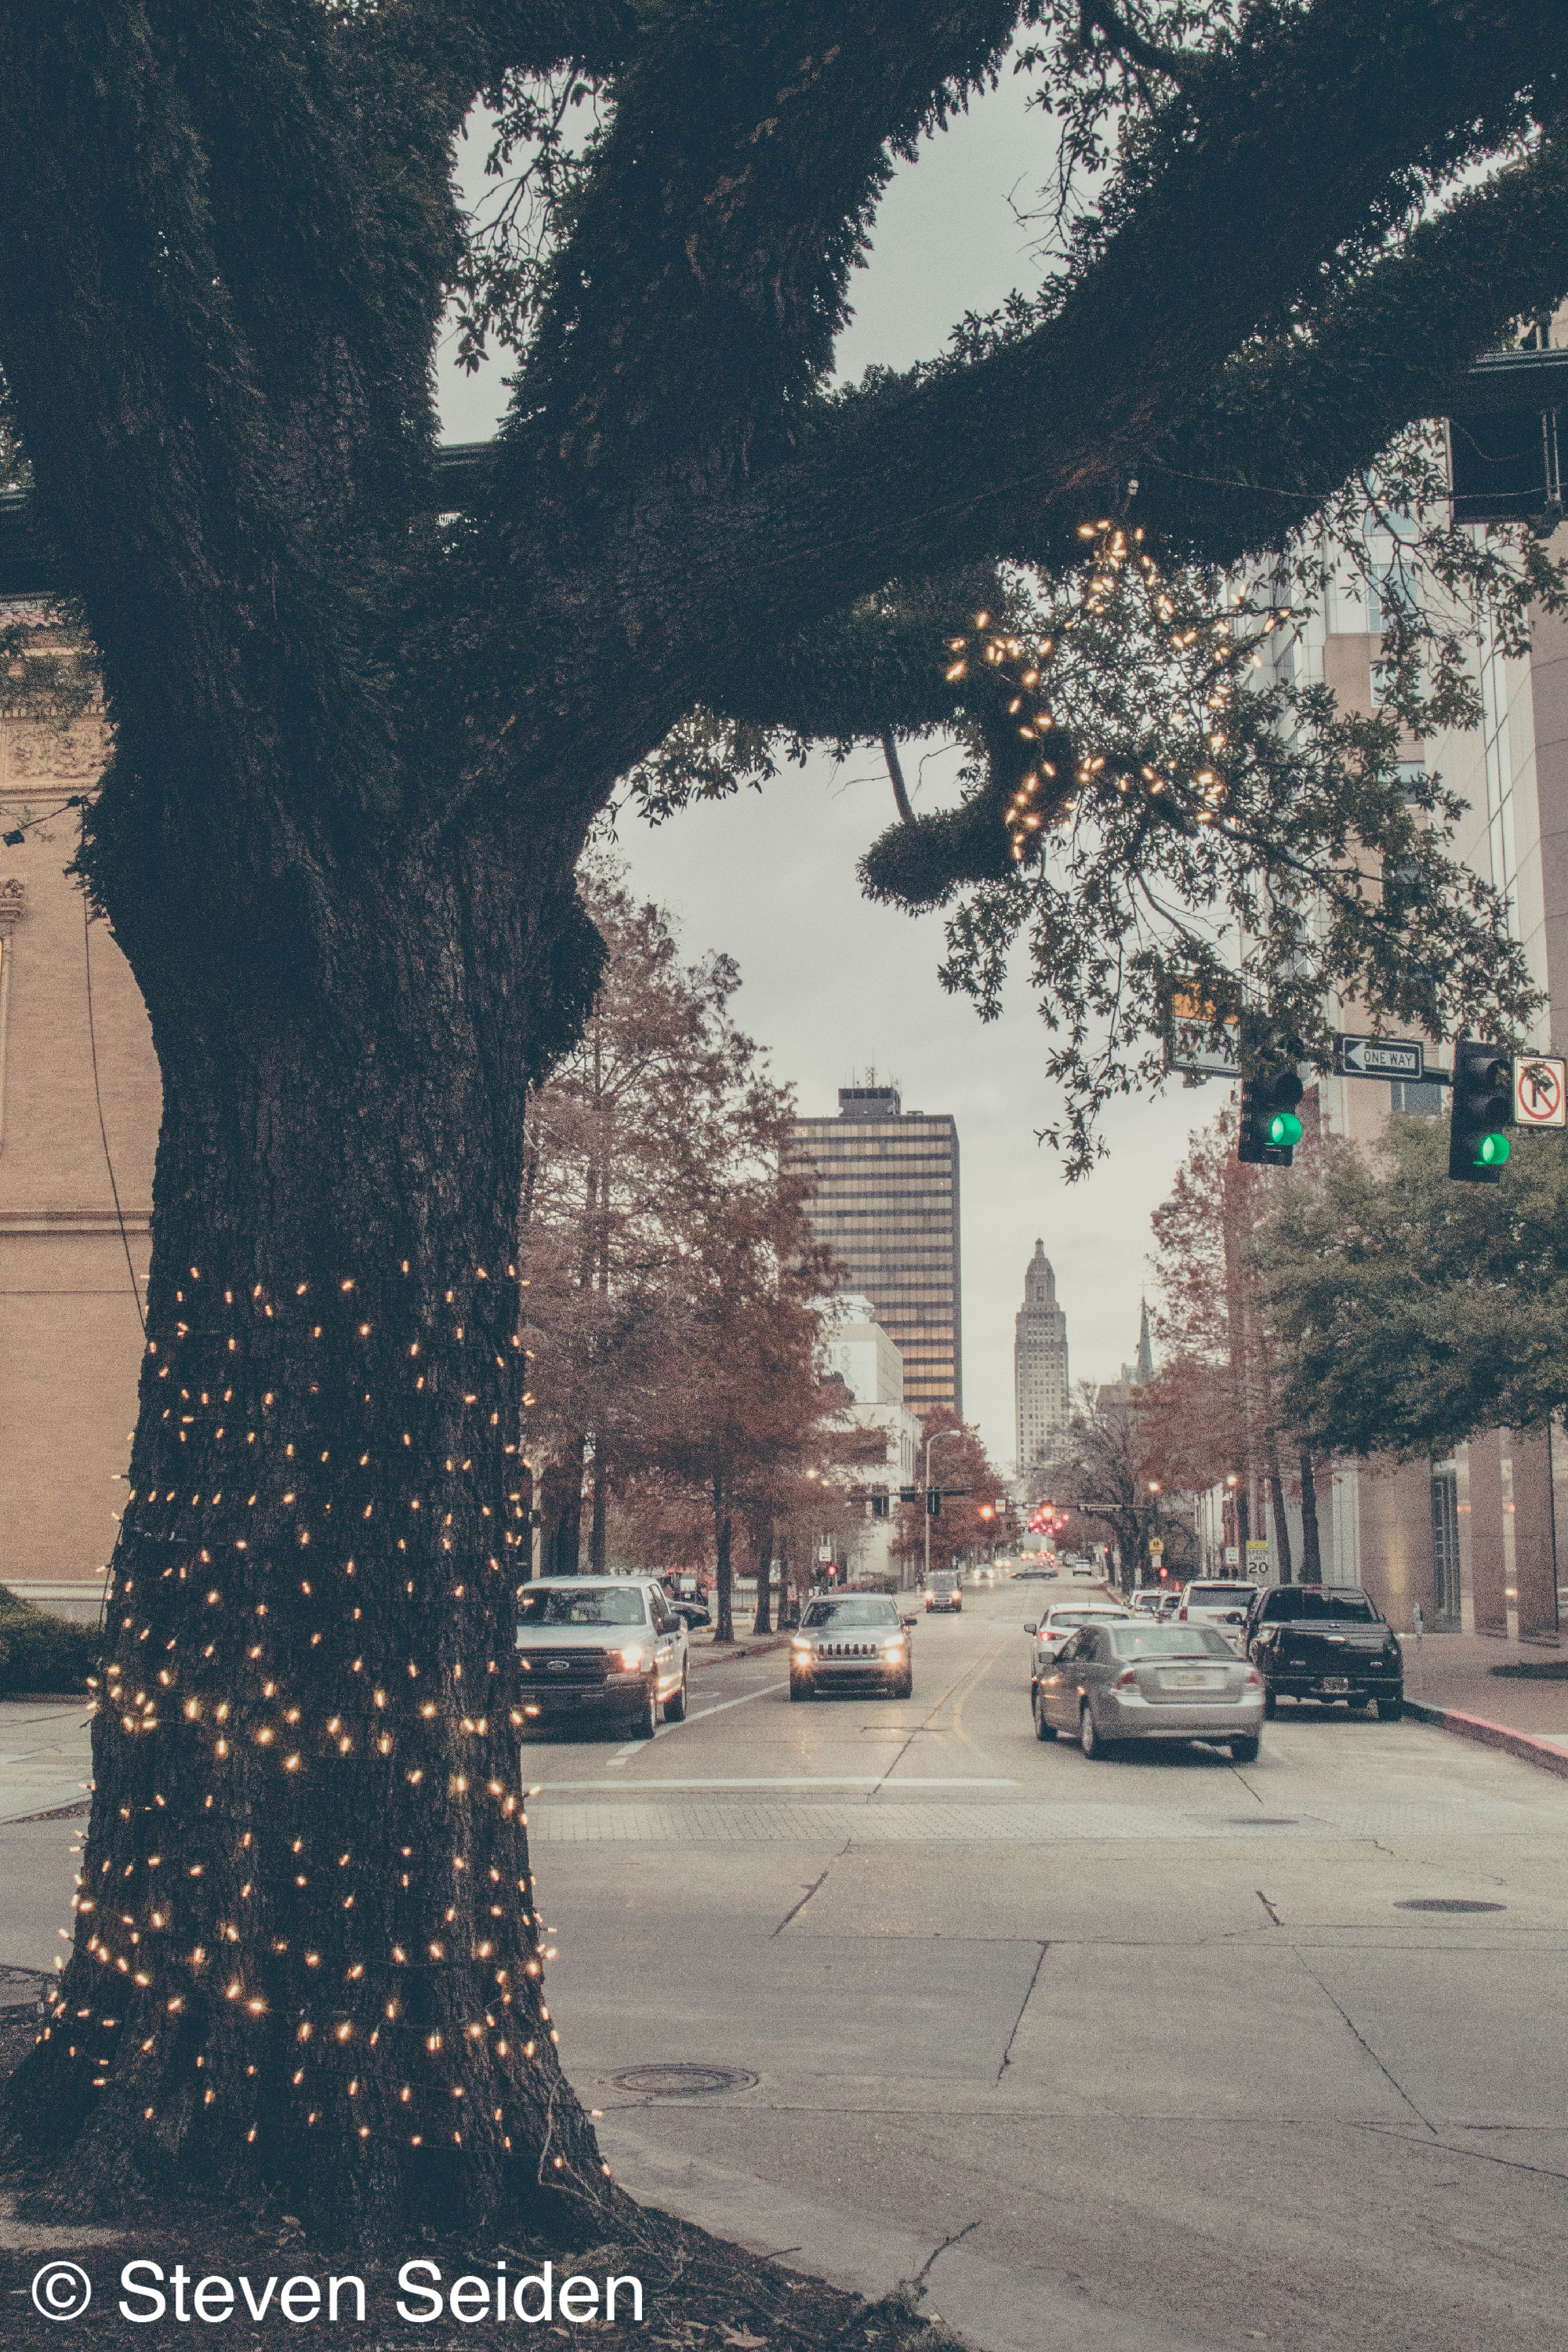 A picture of a downtown street with Christmas lights adorning a tree.